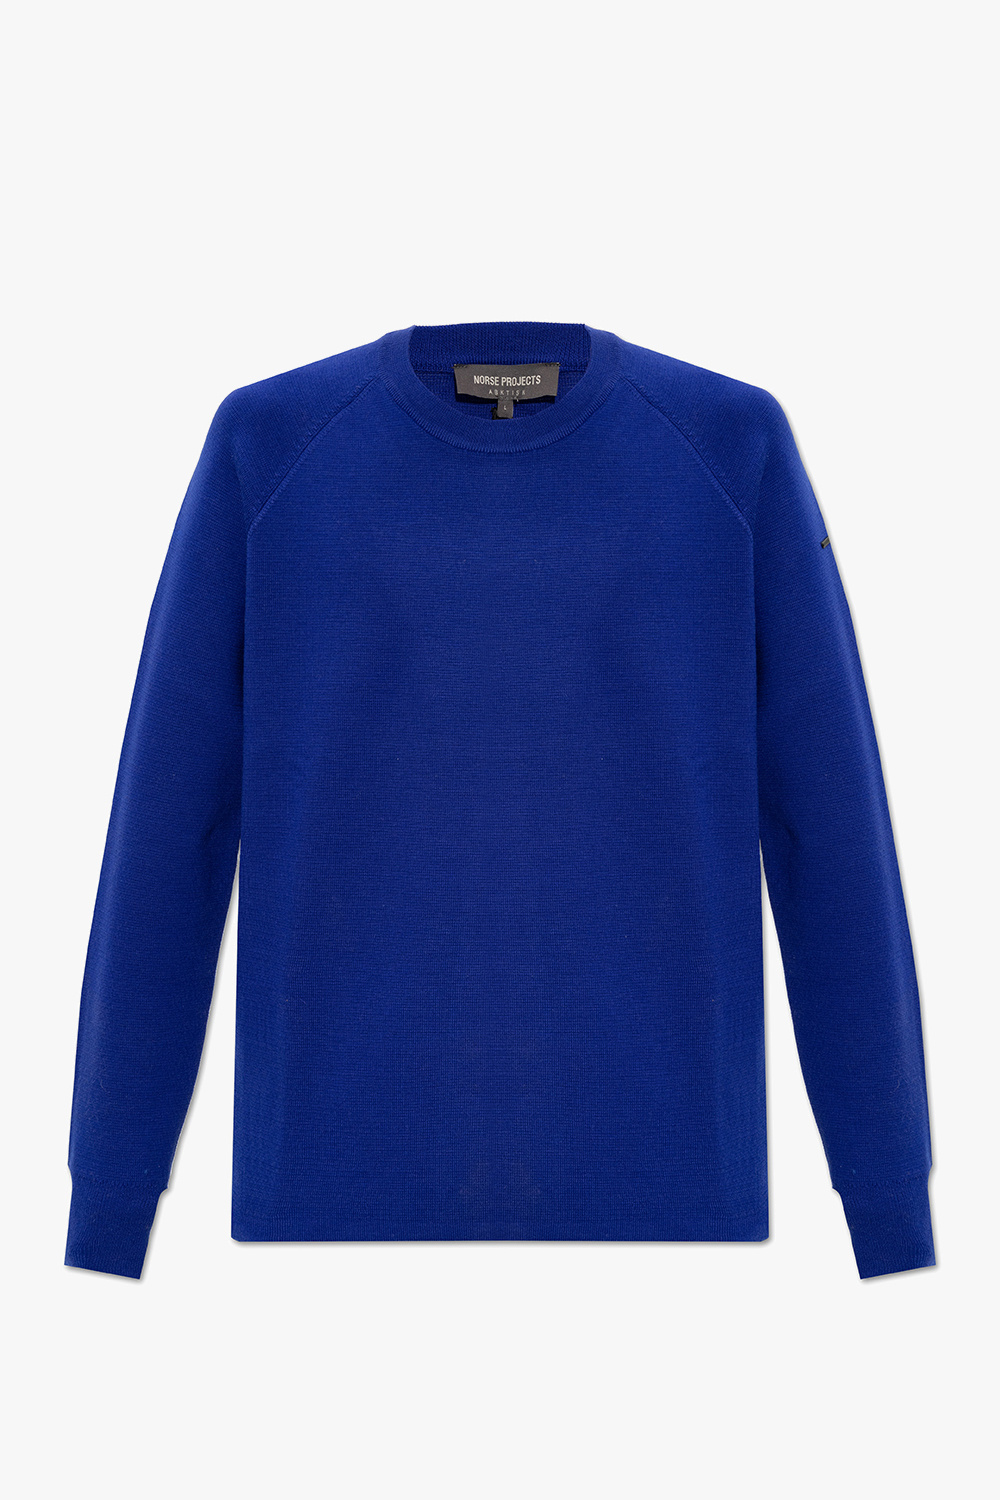 Norse Projects Crewneck sweater